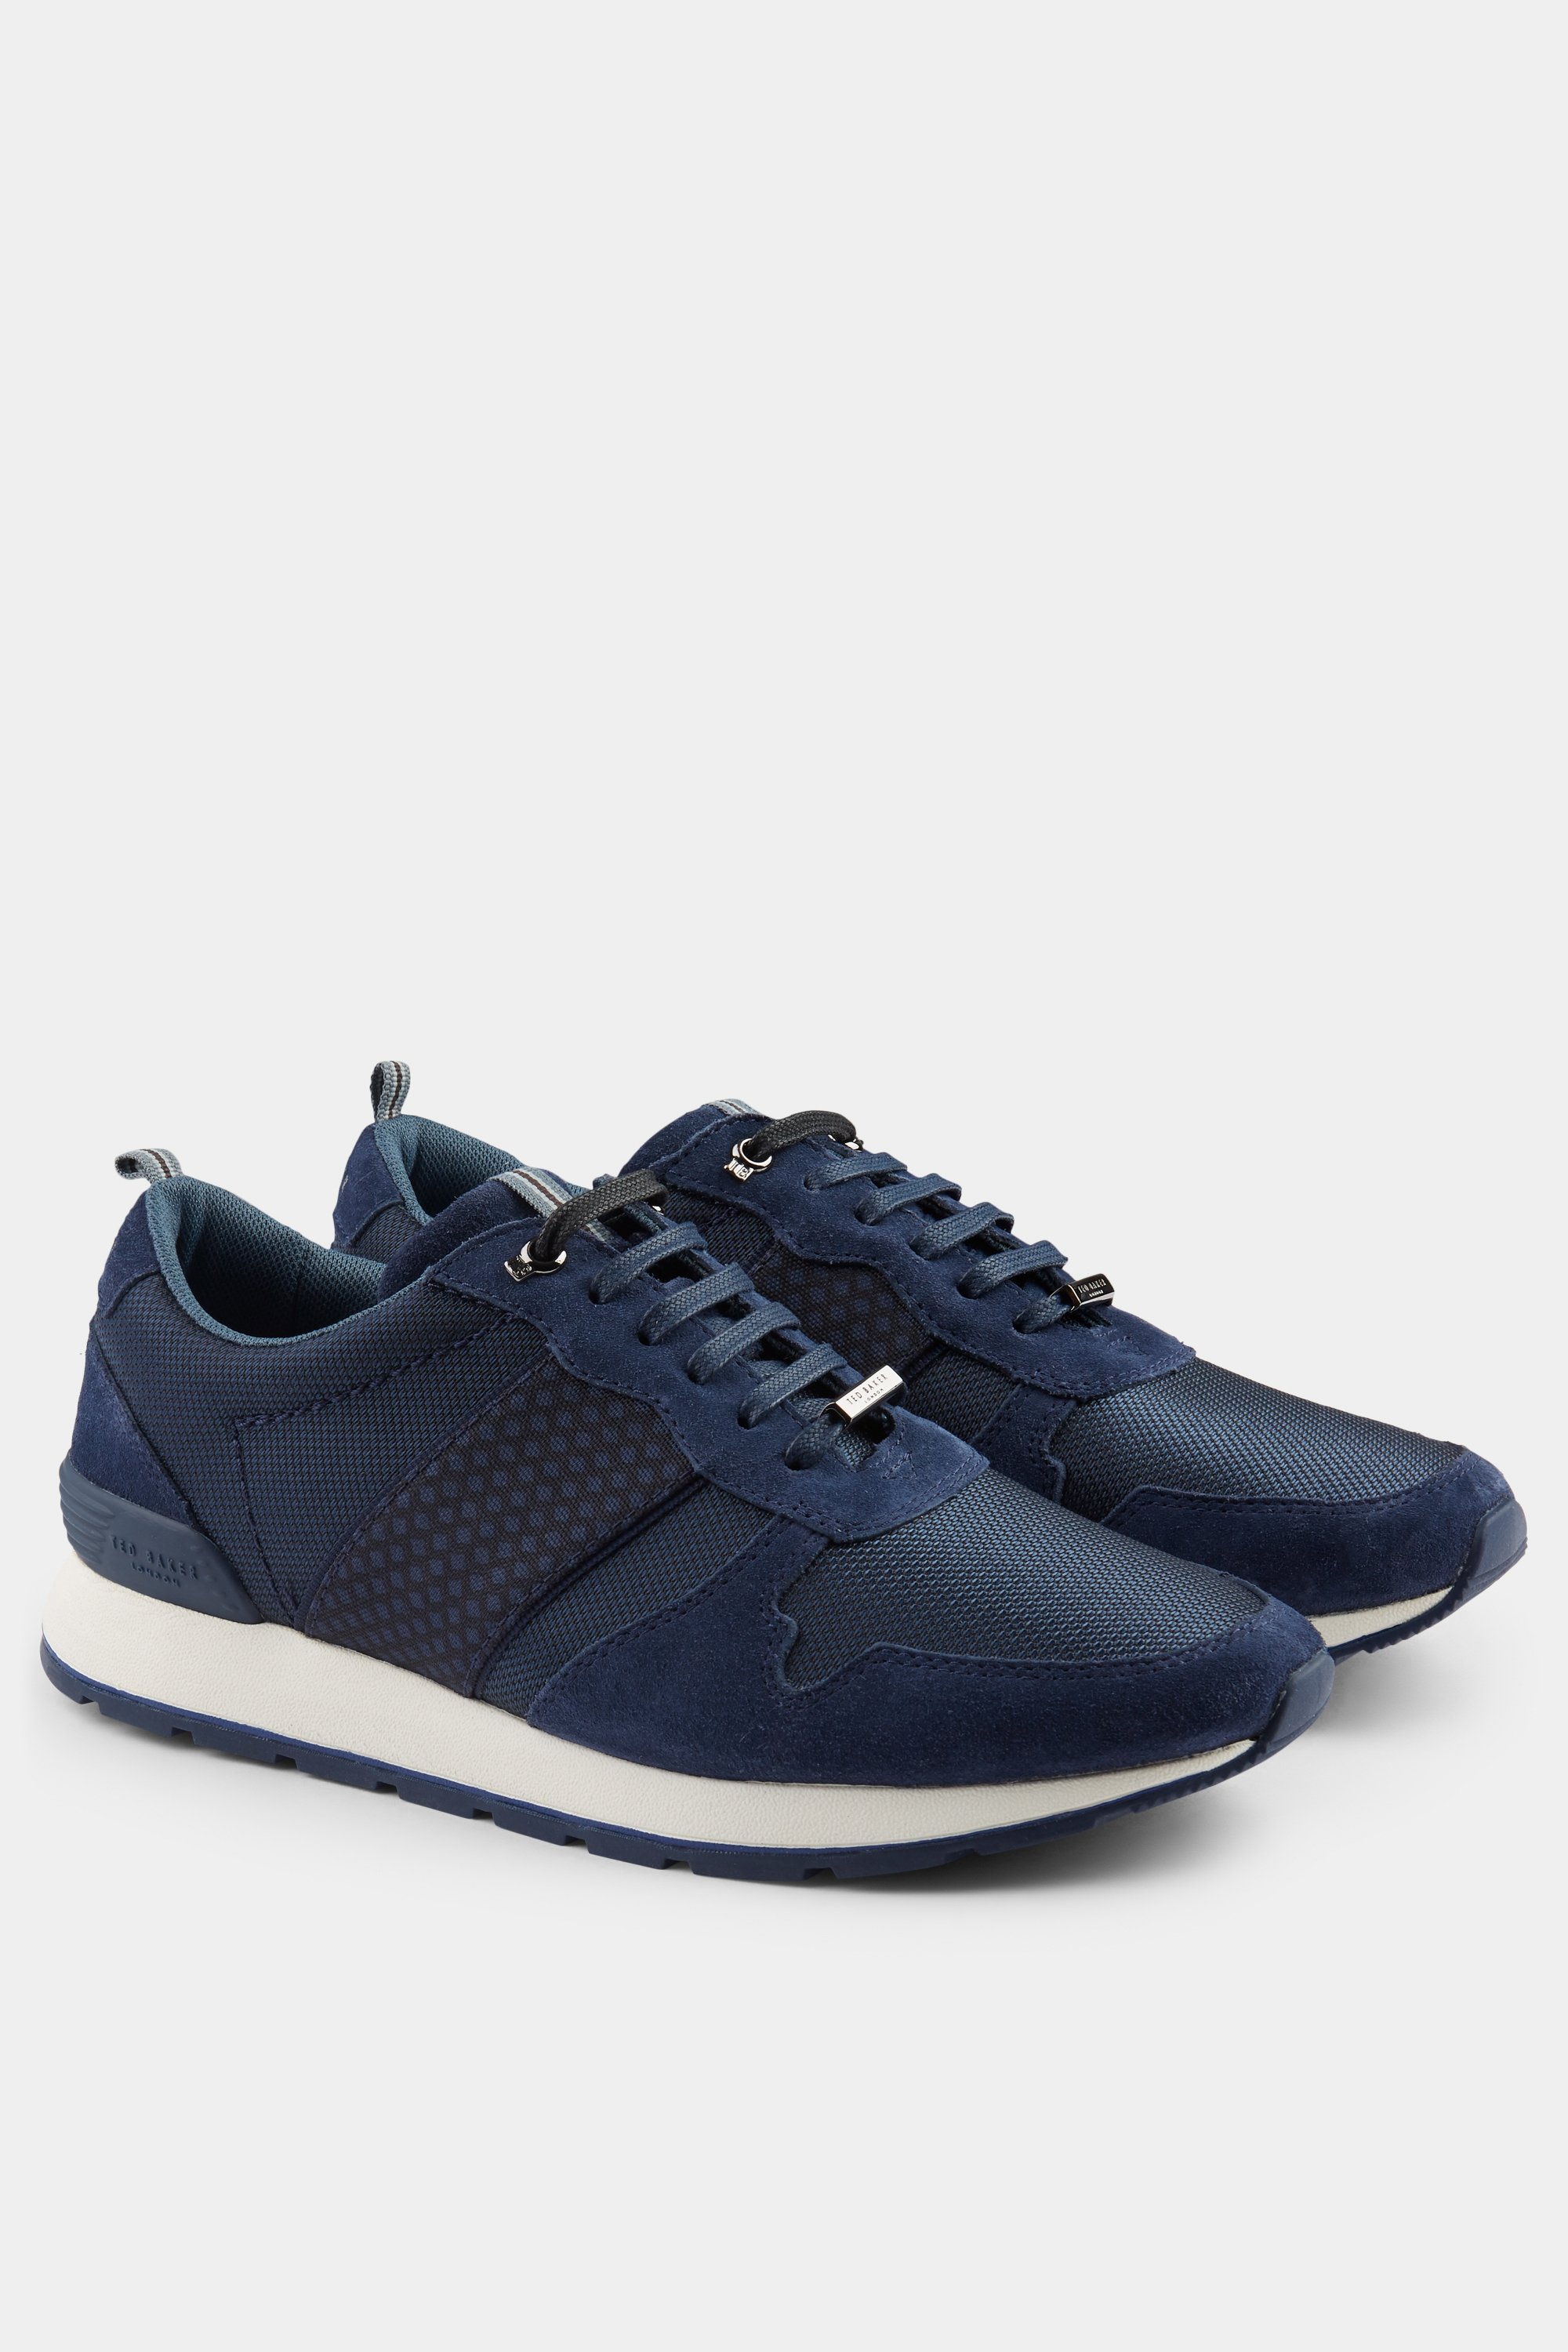 Ted Baker Hebey Navy Trainer